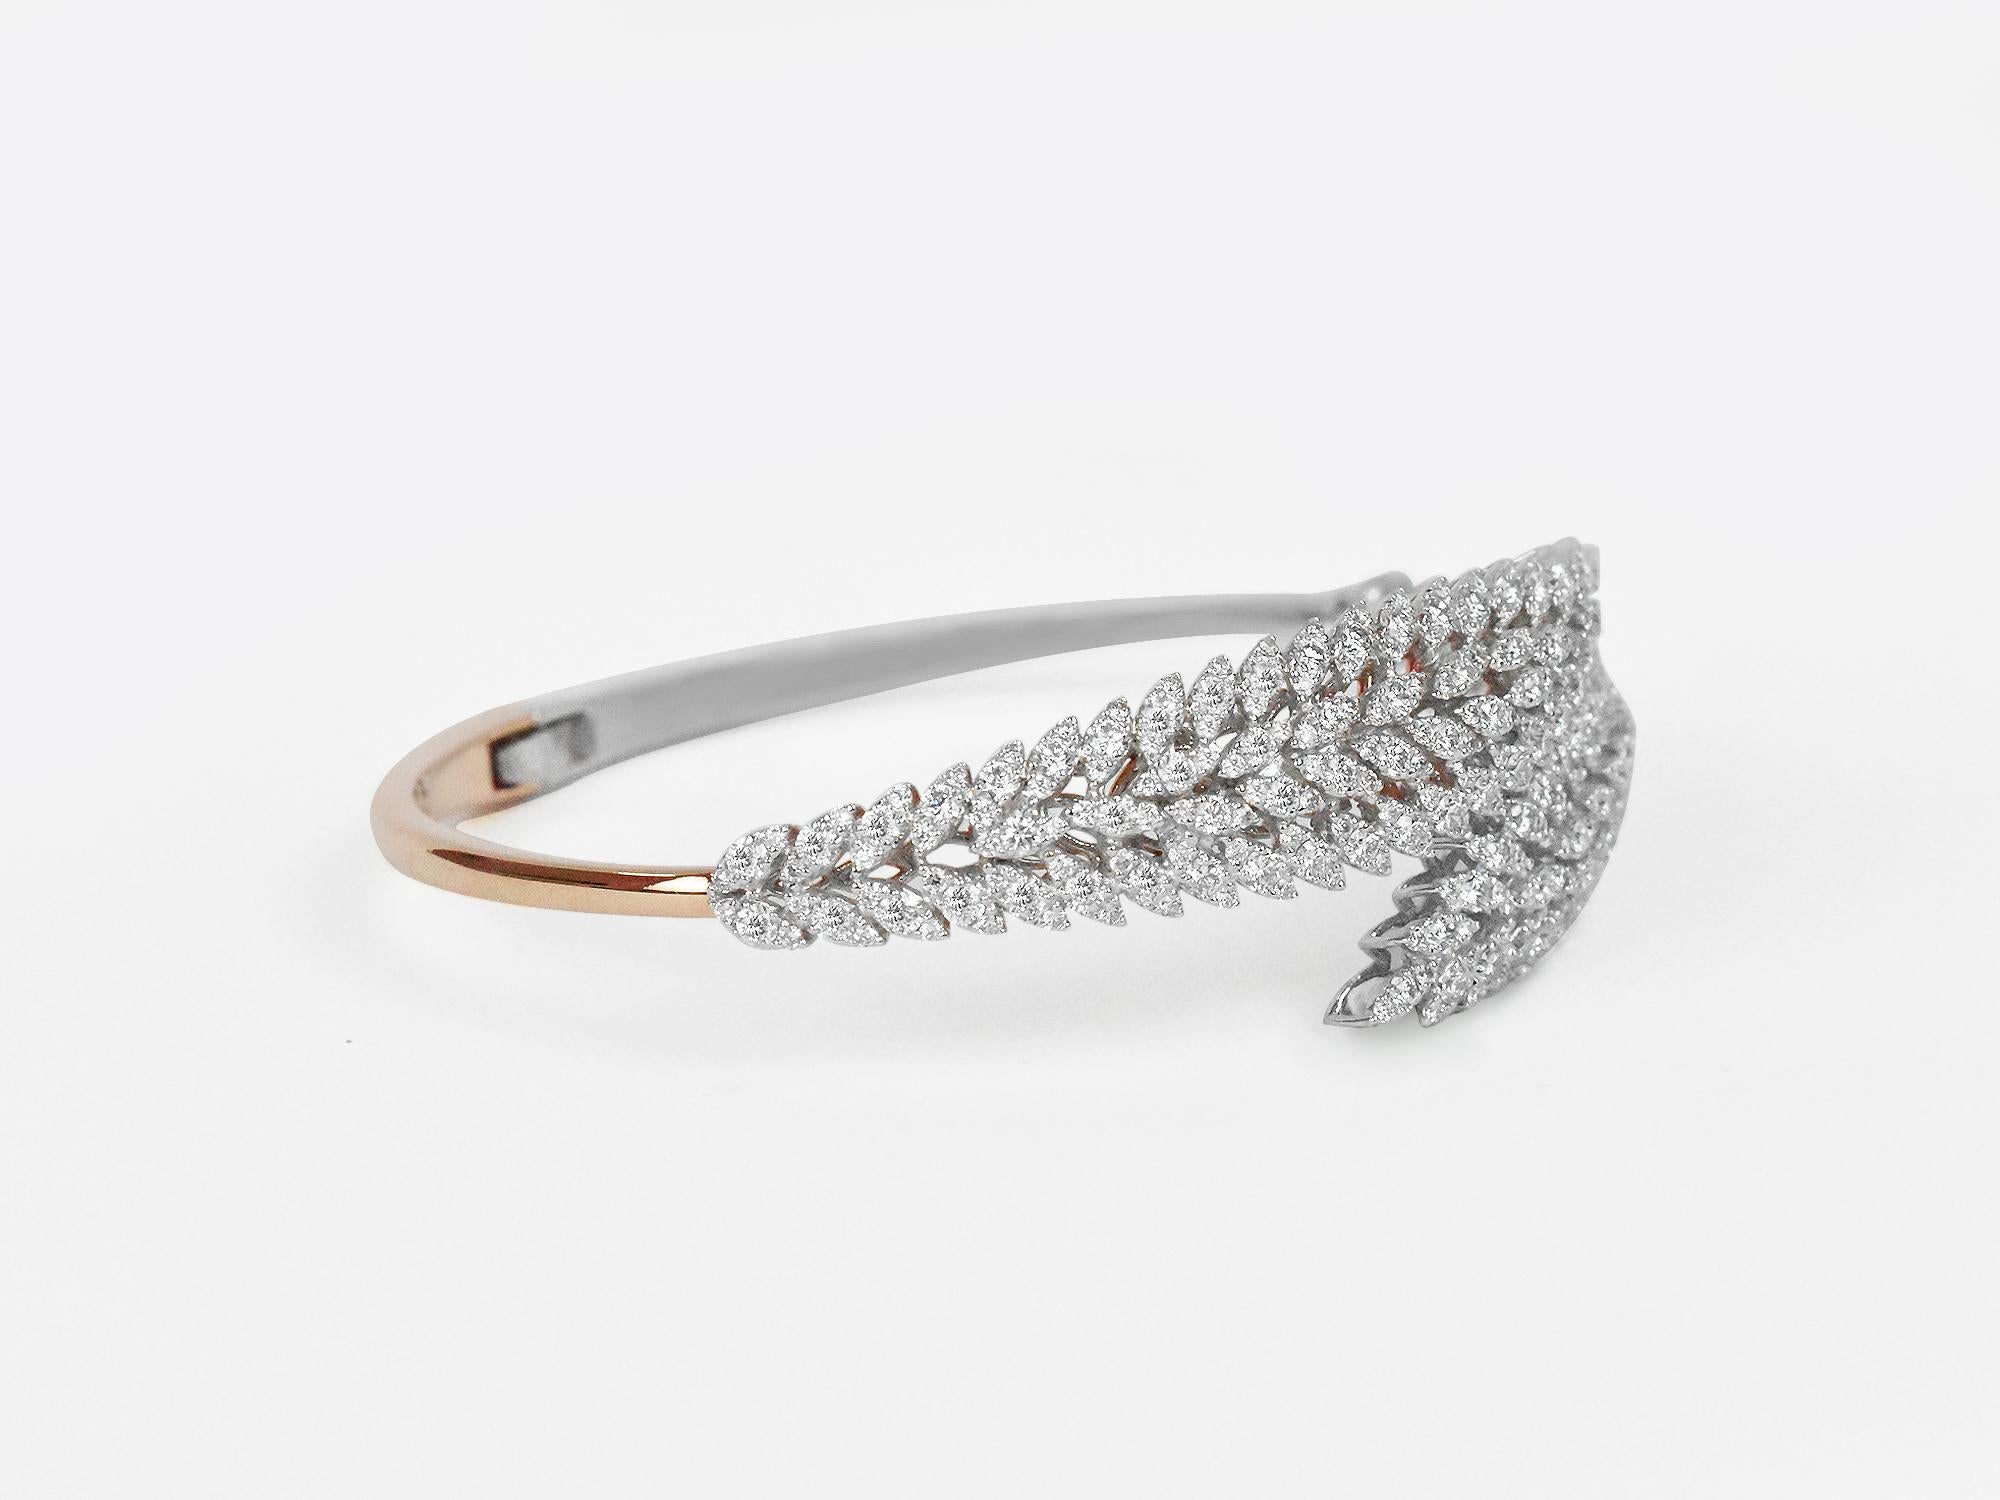 18Karat Gold Two Tone Rose Gold White Gold Diamonds Pave Fashion Bangle Bracelet
     This 18K solid gold,  2 Tone ( Rose Gold & White Gold) Hinge Clamper bangle. A strong piece of jewelry for years, decades & generations to wear this piece. Created